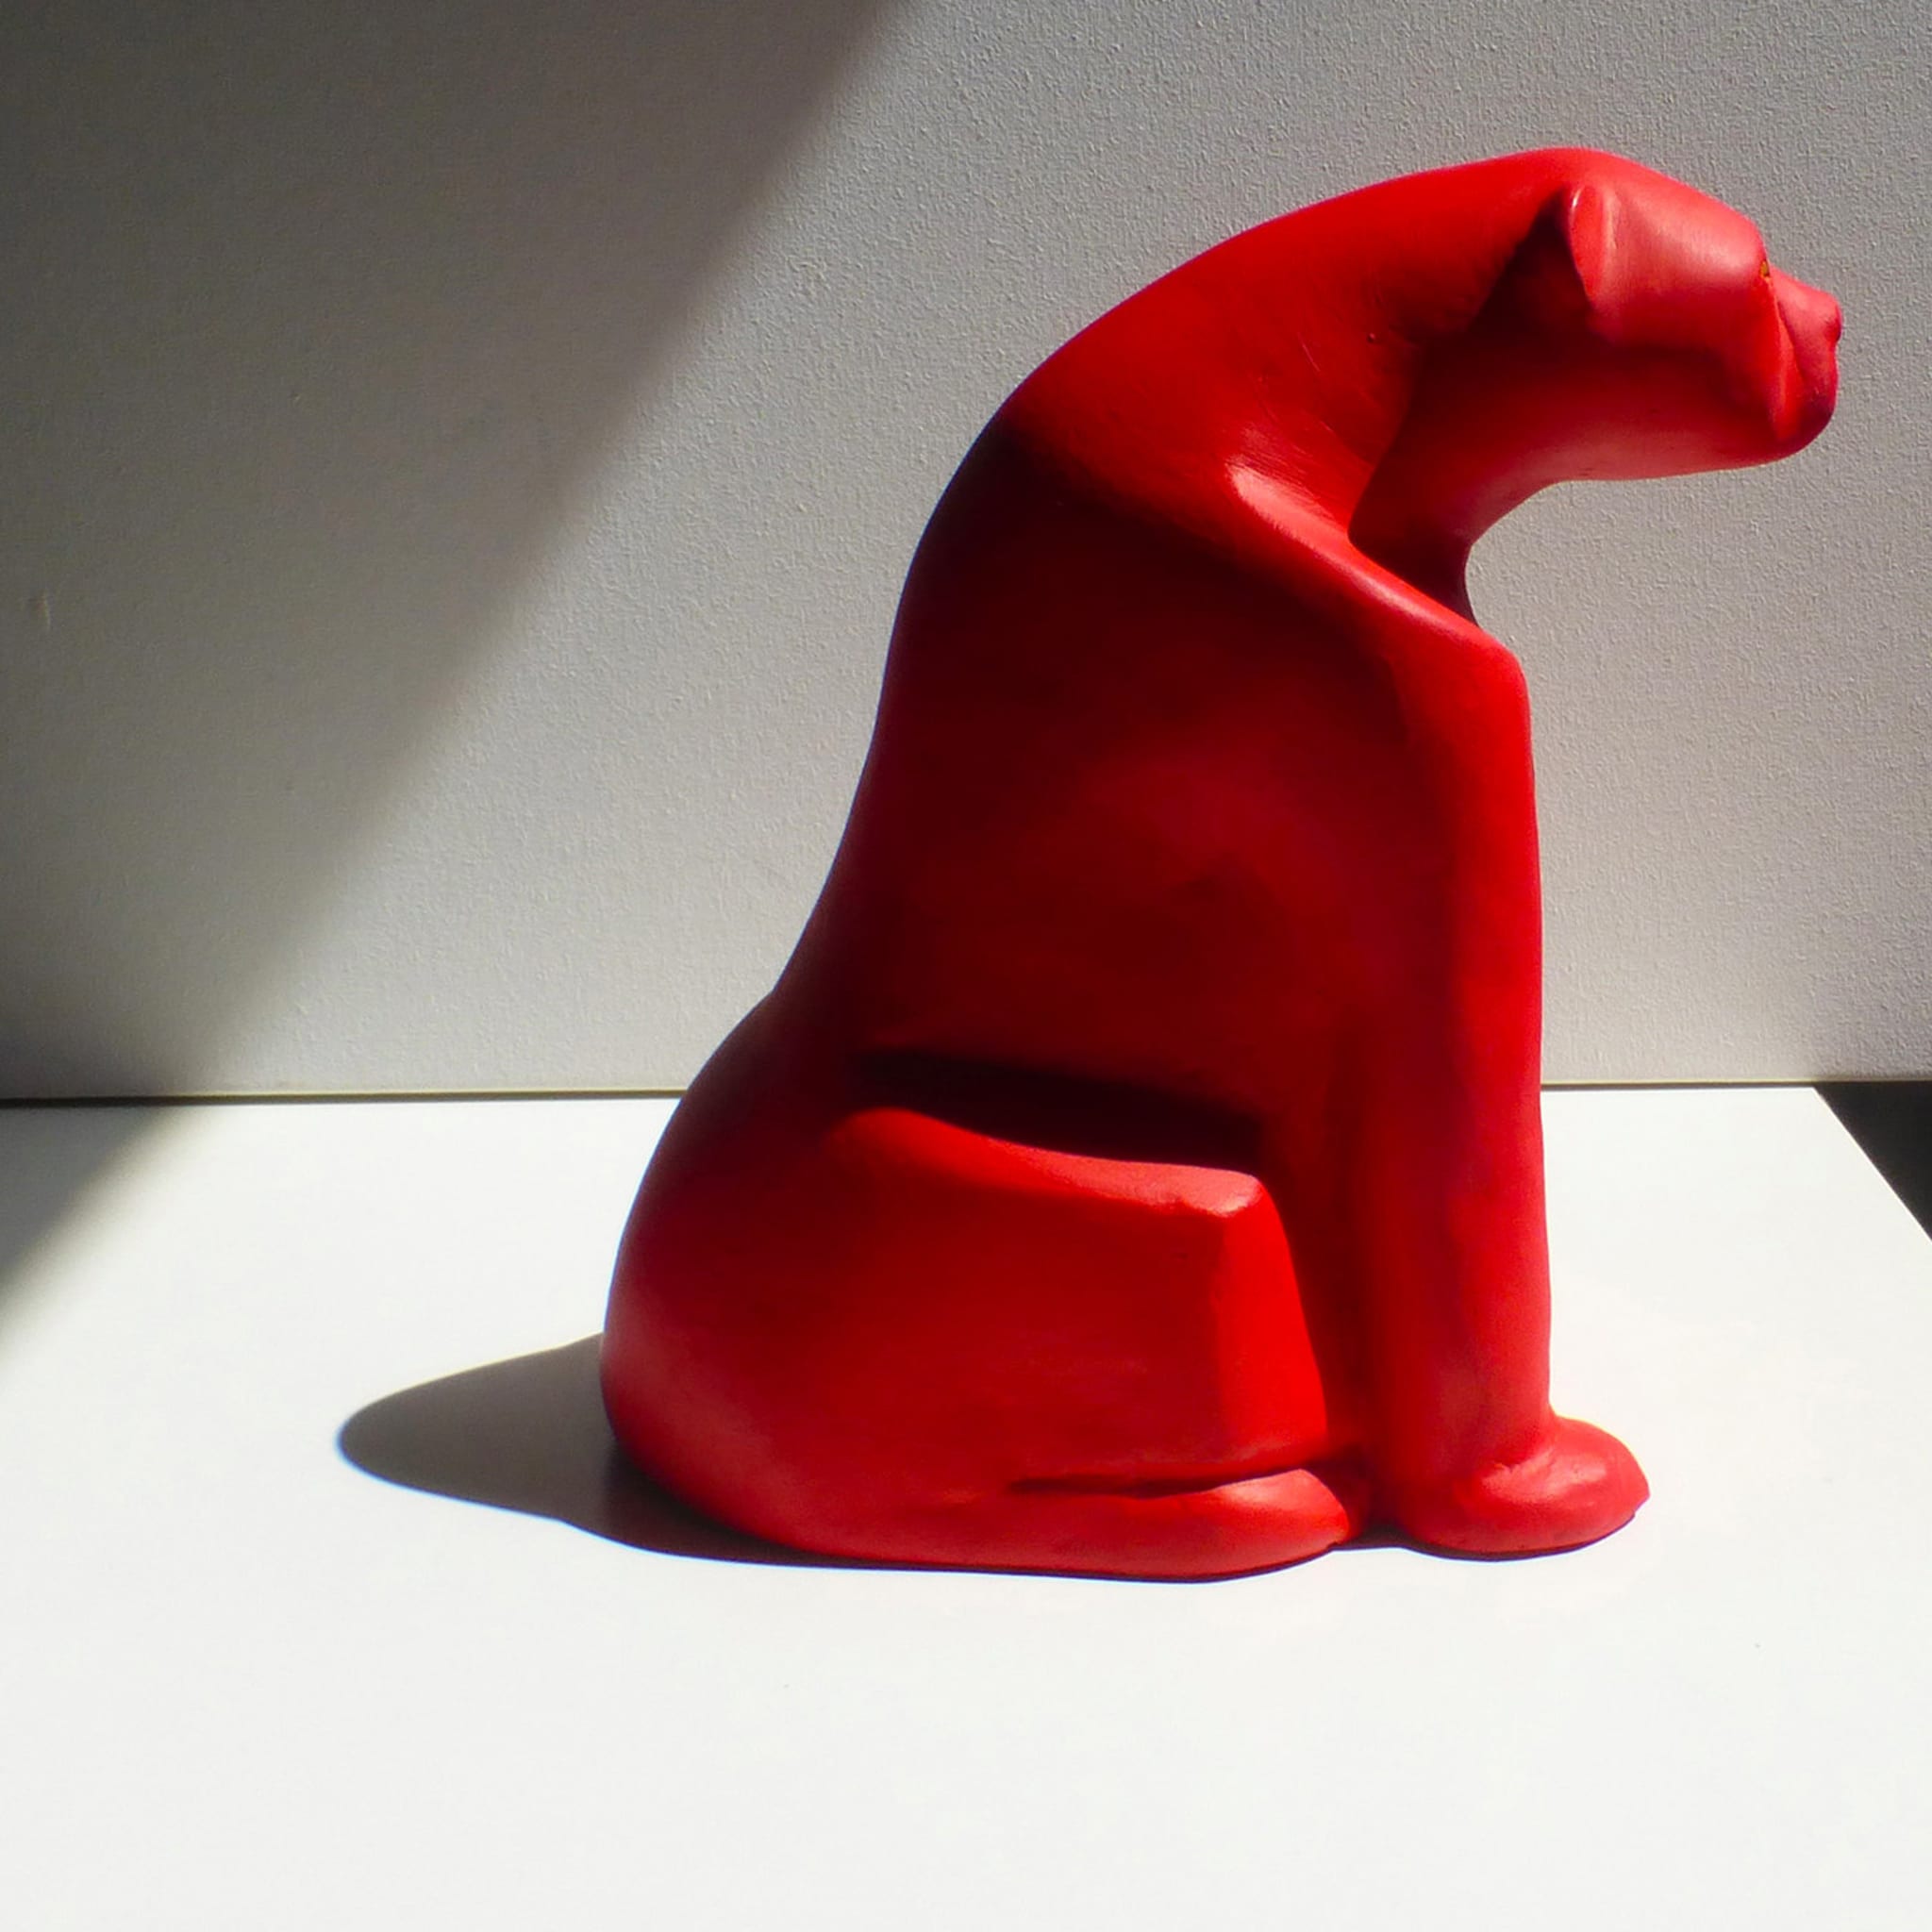 Bright Red Panther Sculpture - Alternative view 2